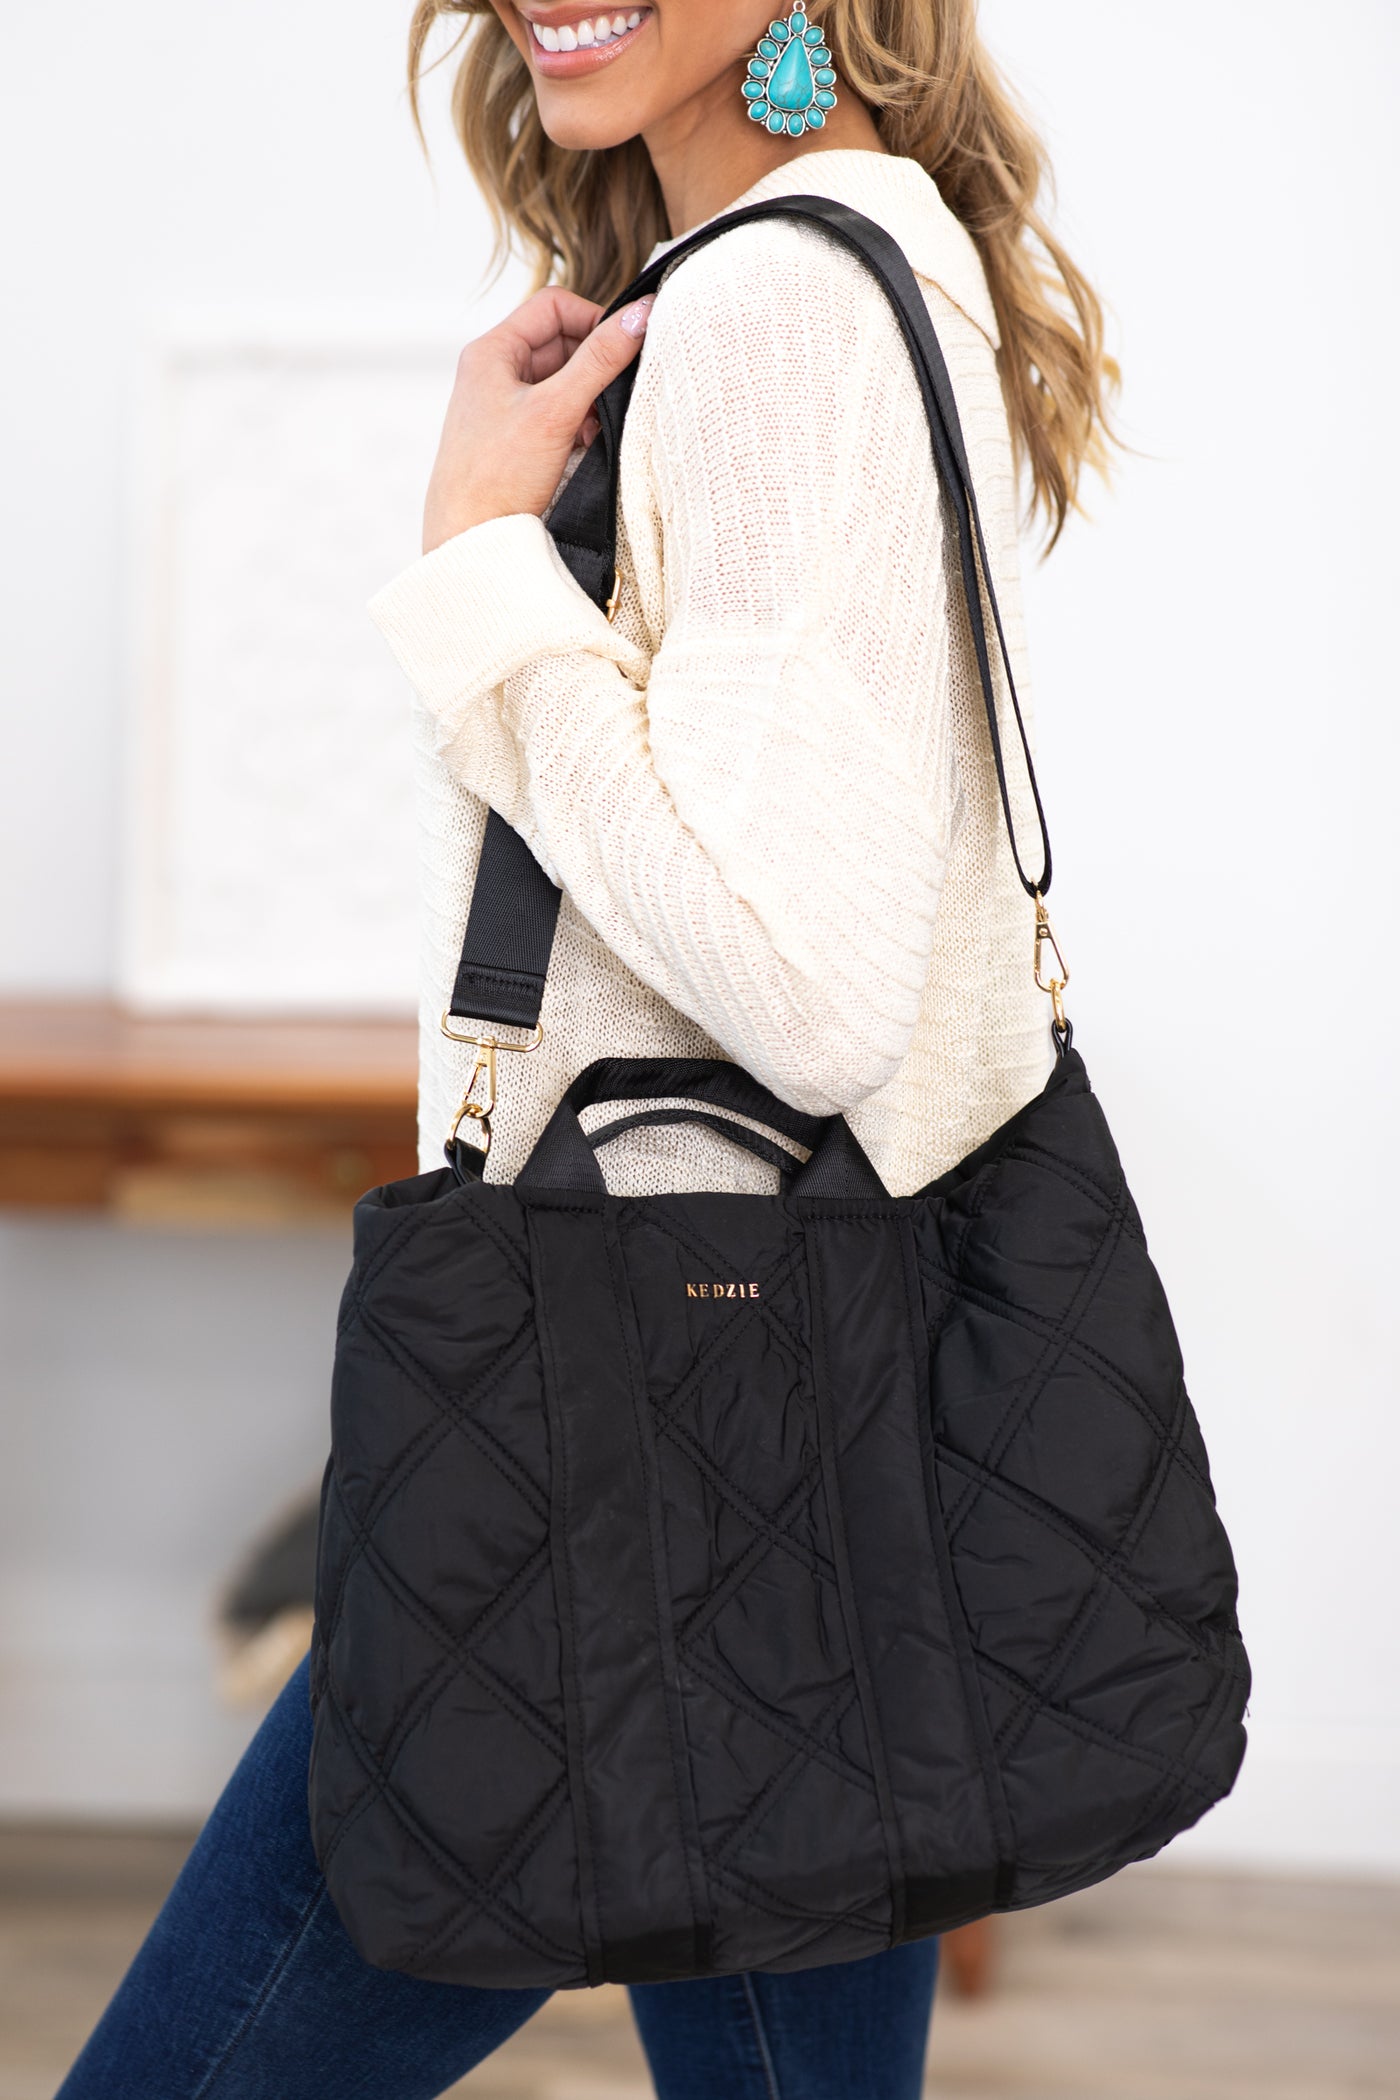 Black Quilted Tote Bag With Crossbody Strap